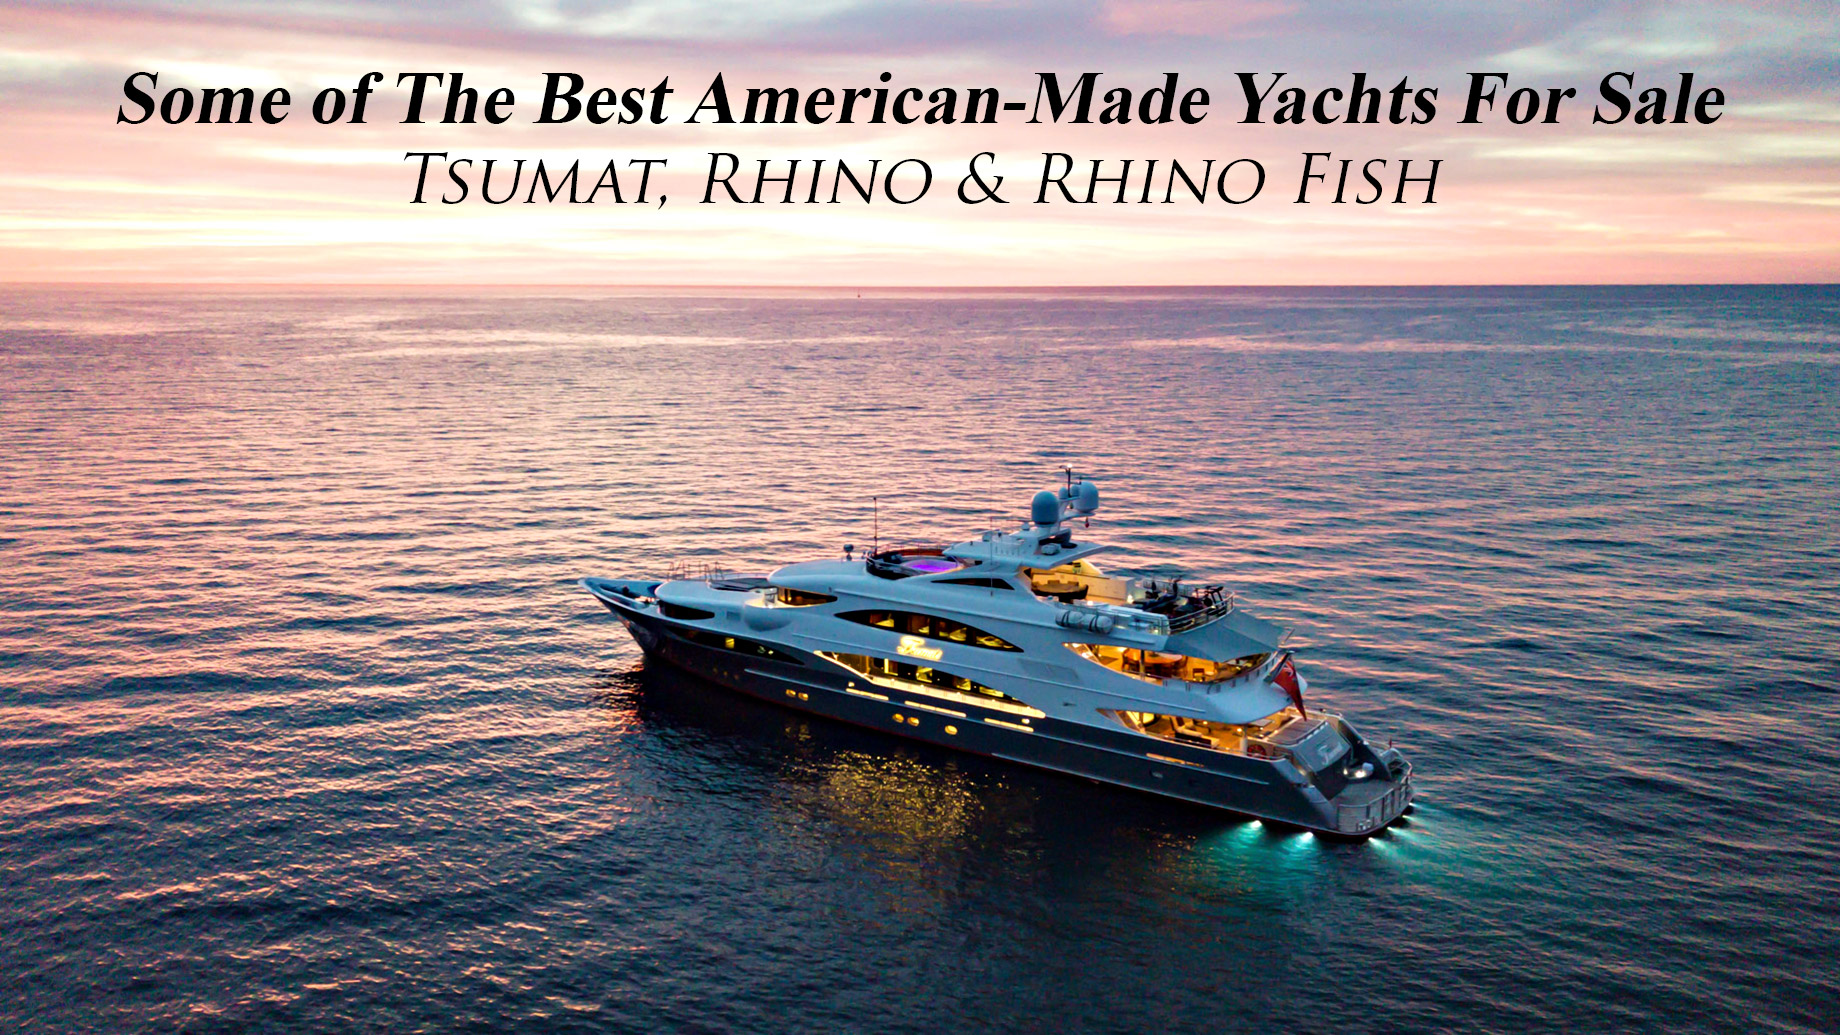 Some of The Best American-Made Yachts For Sale - Tsumat, Rhino & Rhino Fish